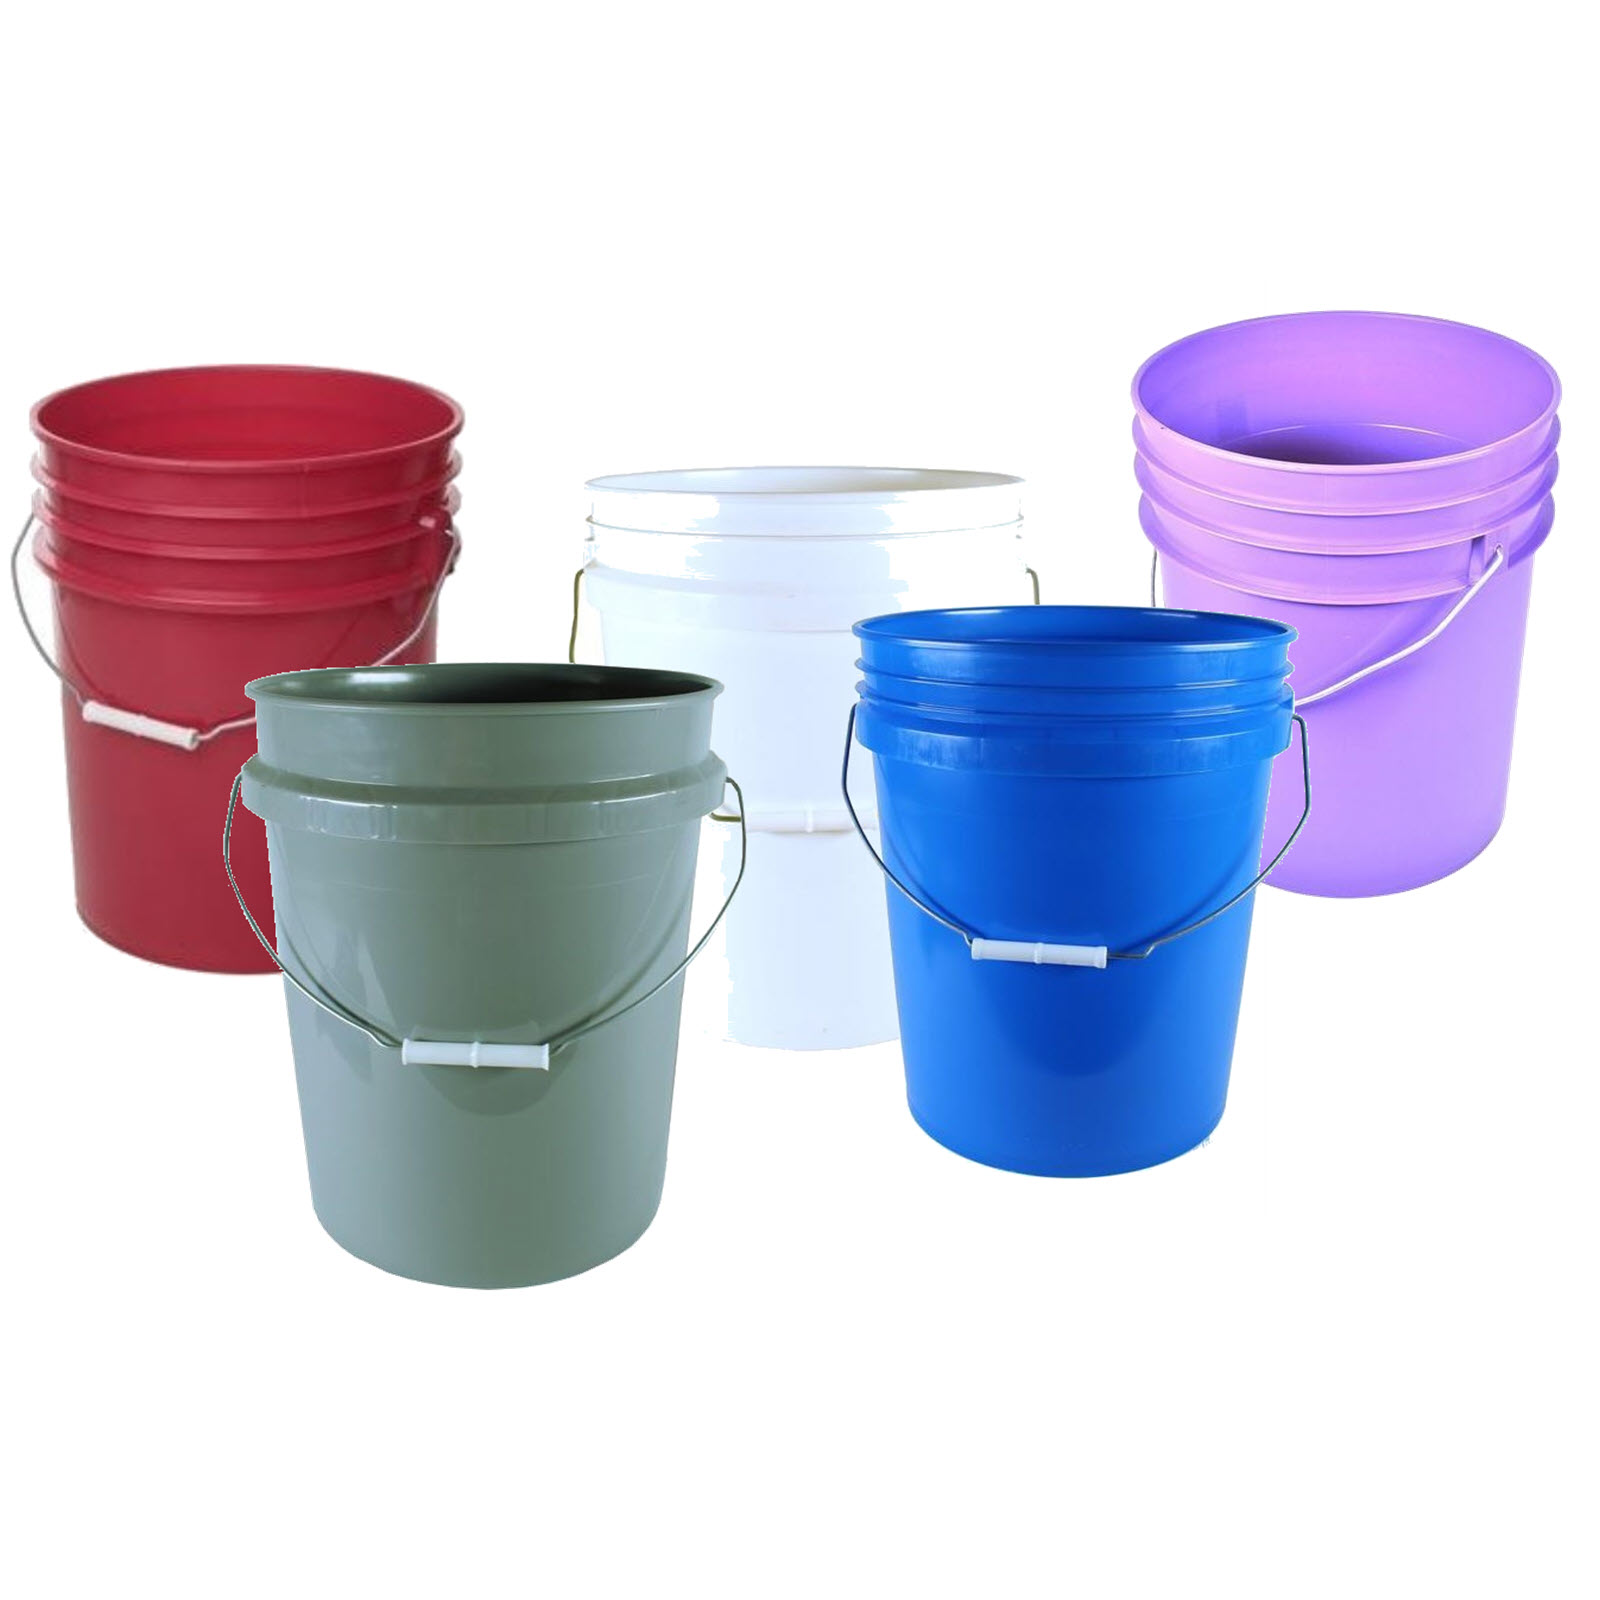 Bucket 5 Gallon Round Questions & Answers